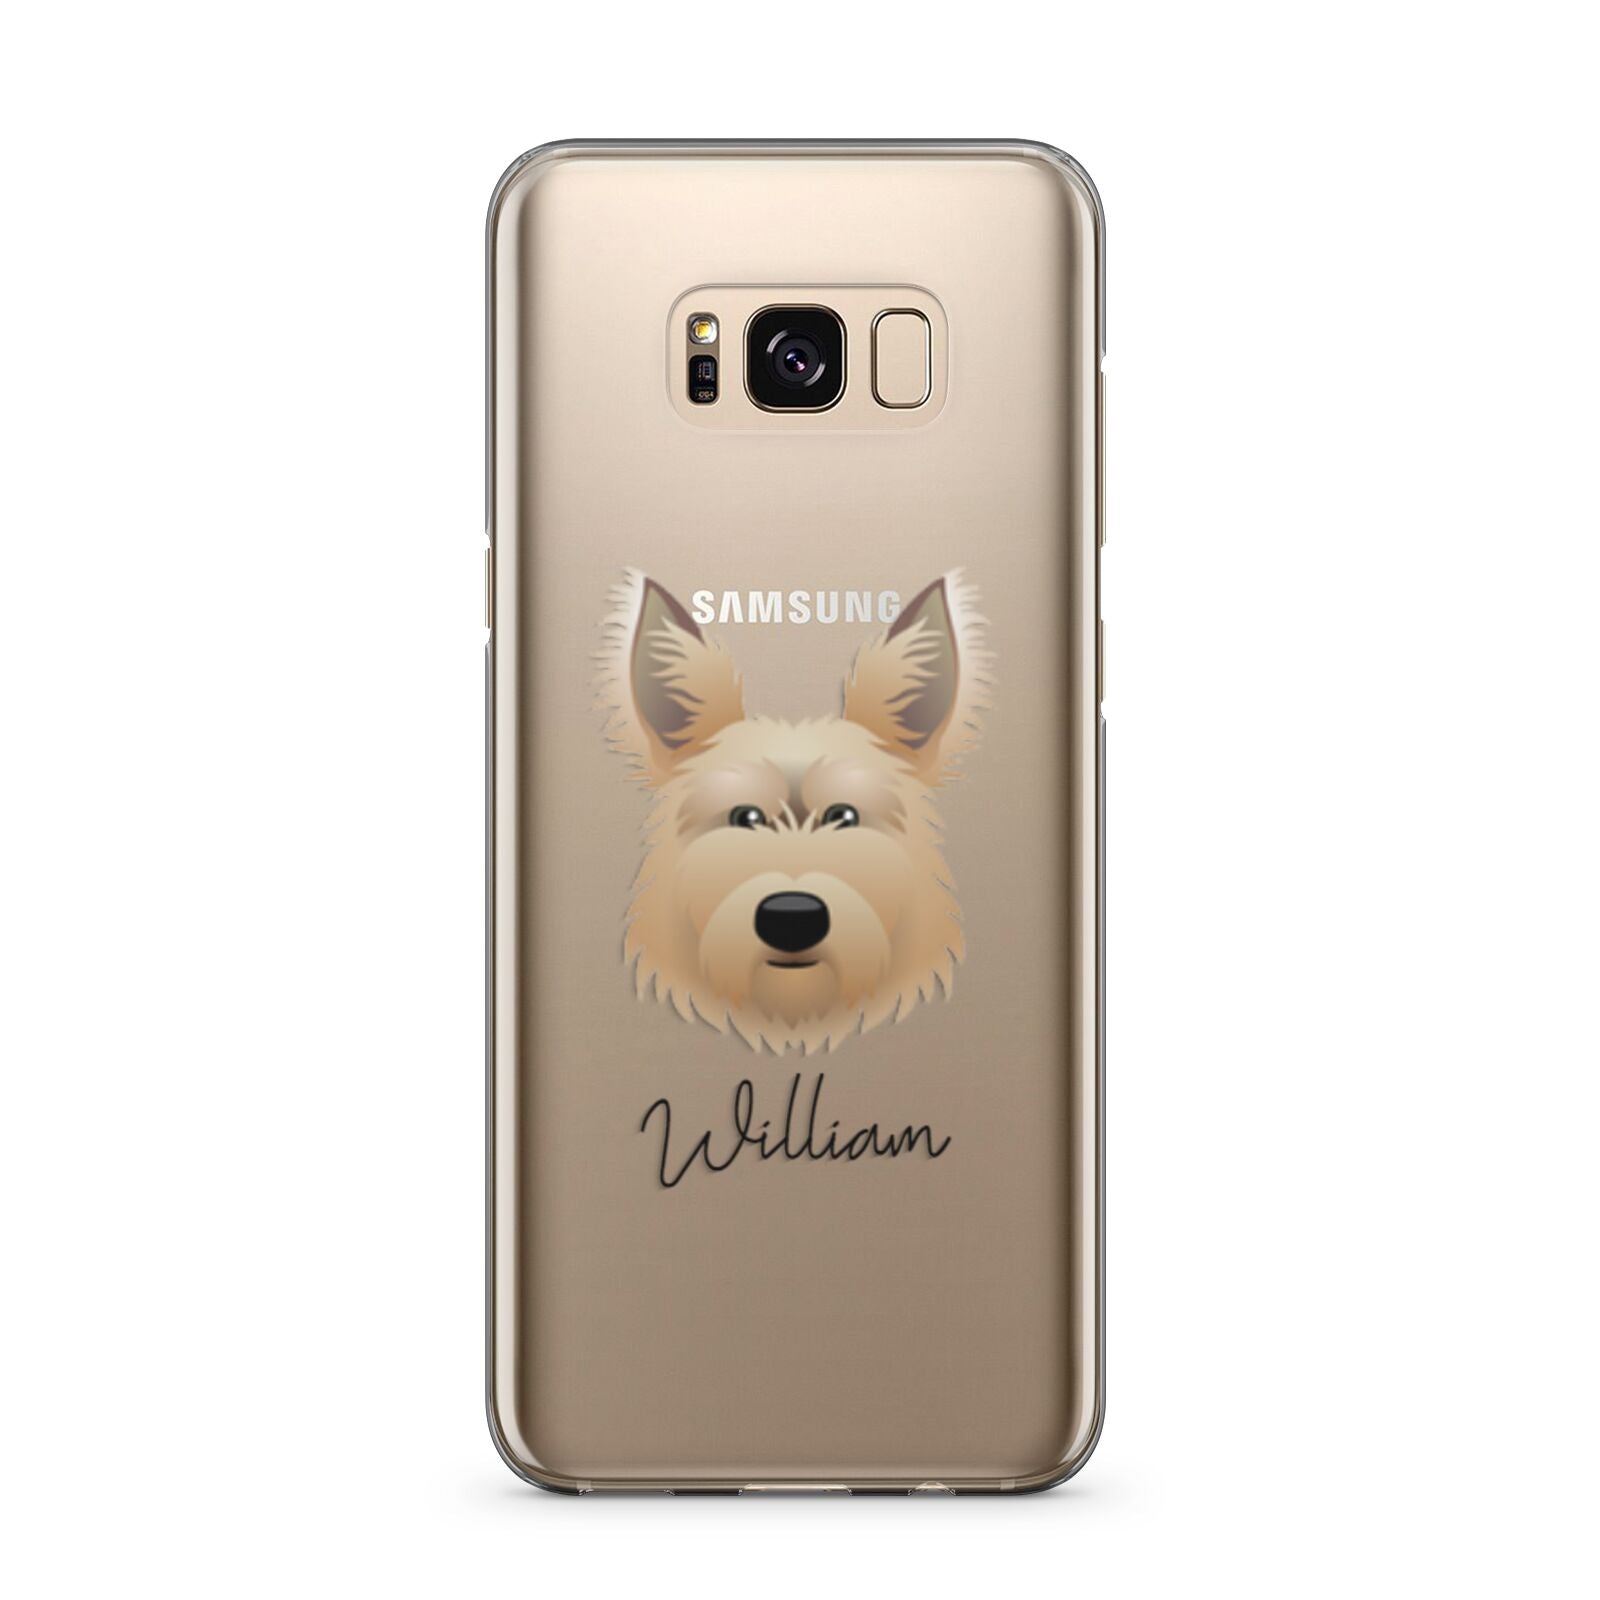 Picardy Sheepdog Personalised Samsung Galaxy S8 Plus Case